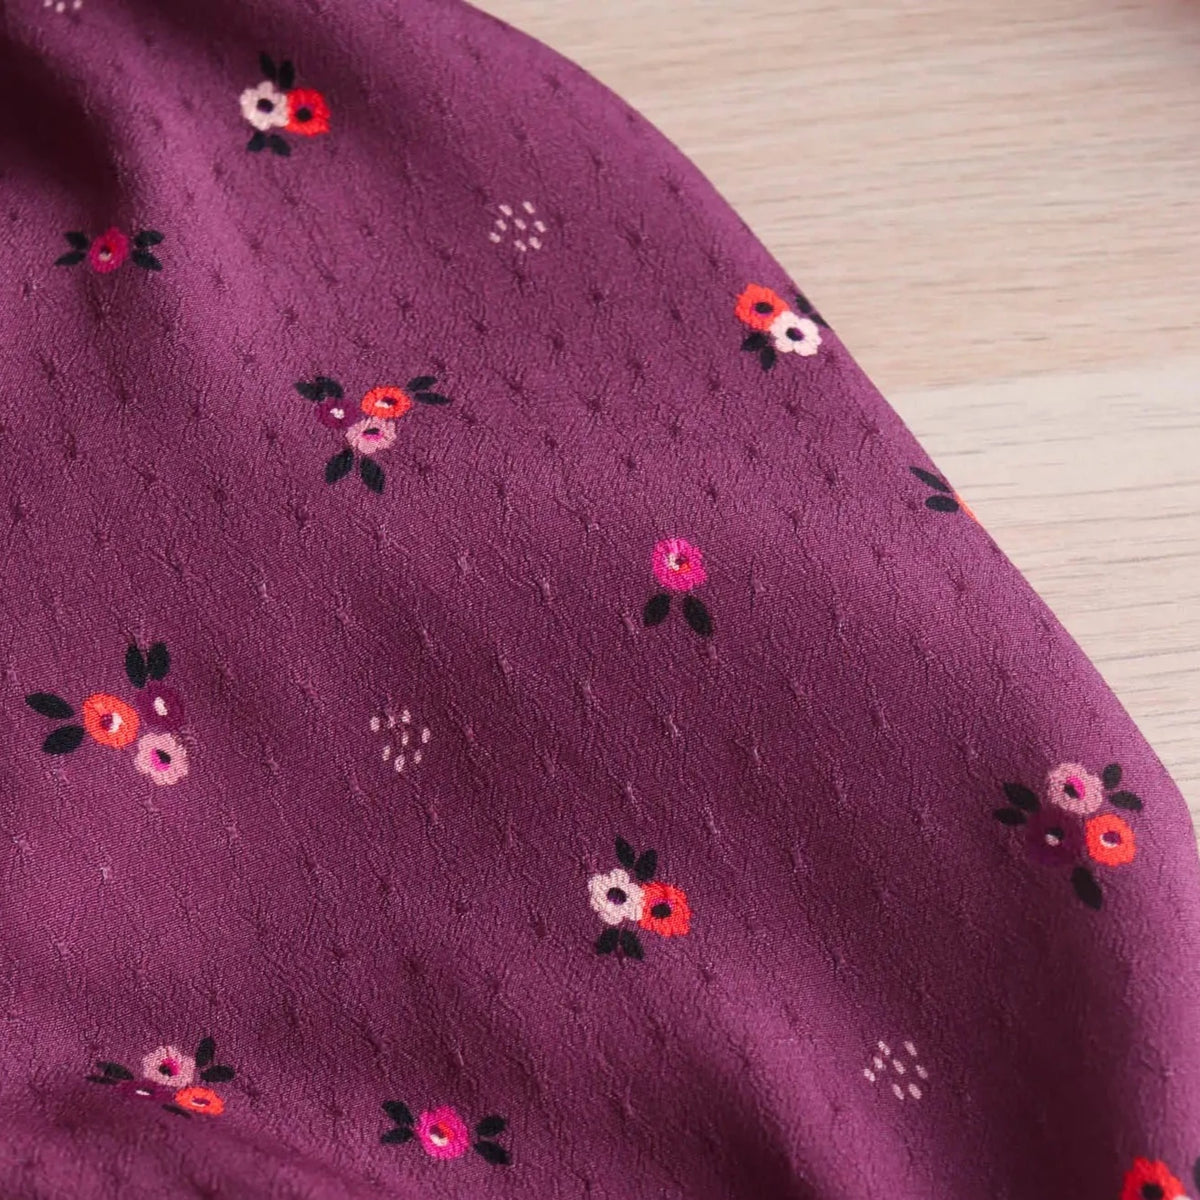 Lise Tailor Dotted Viscose Crepe Fabric - Rêverie - Priced per 0.5 metre